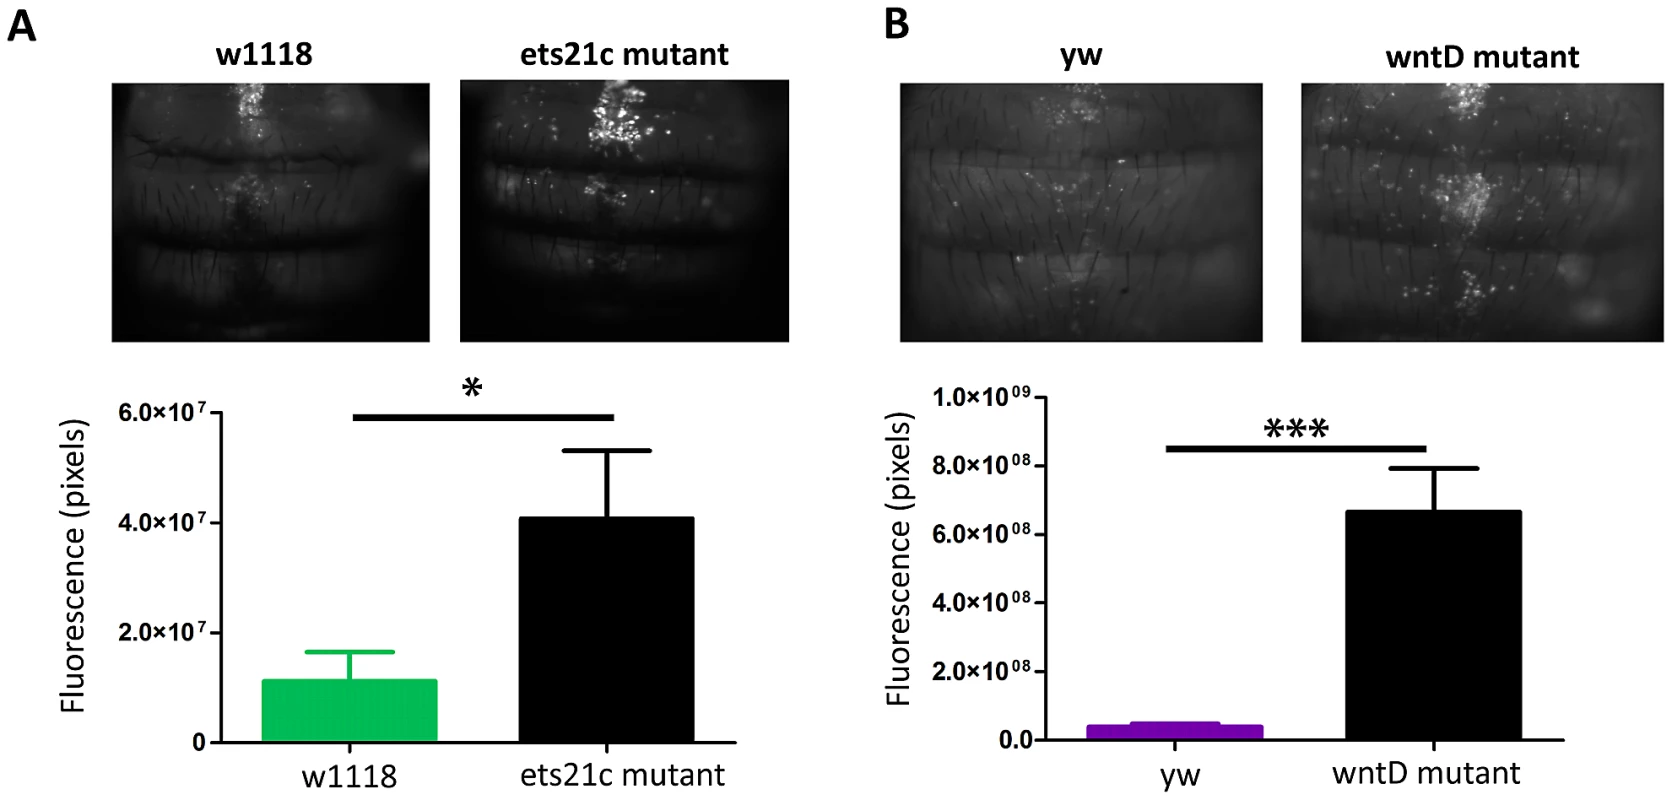 Ets21c and wntD mutants both have increased phagocytic activity relative to their parental line.